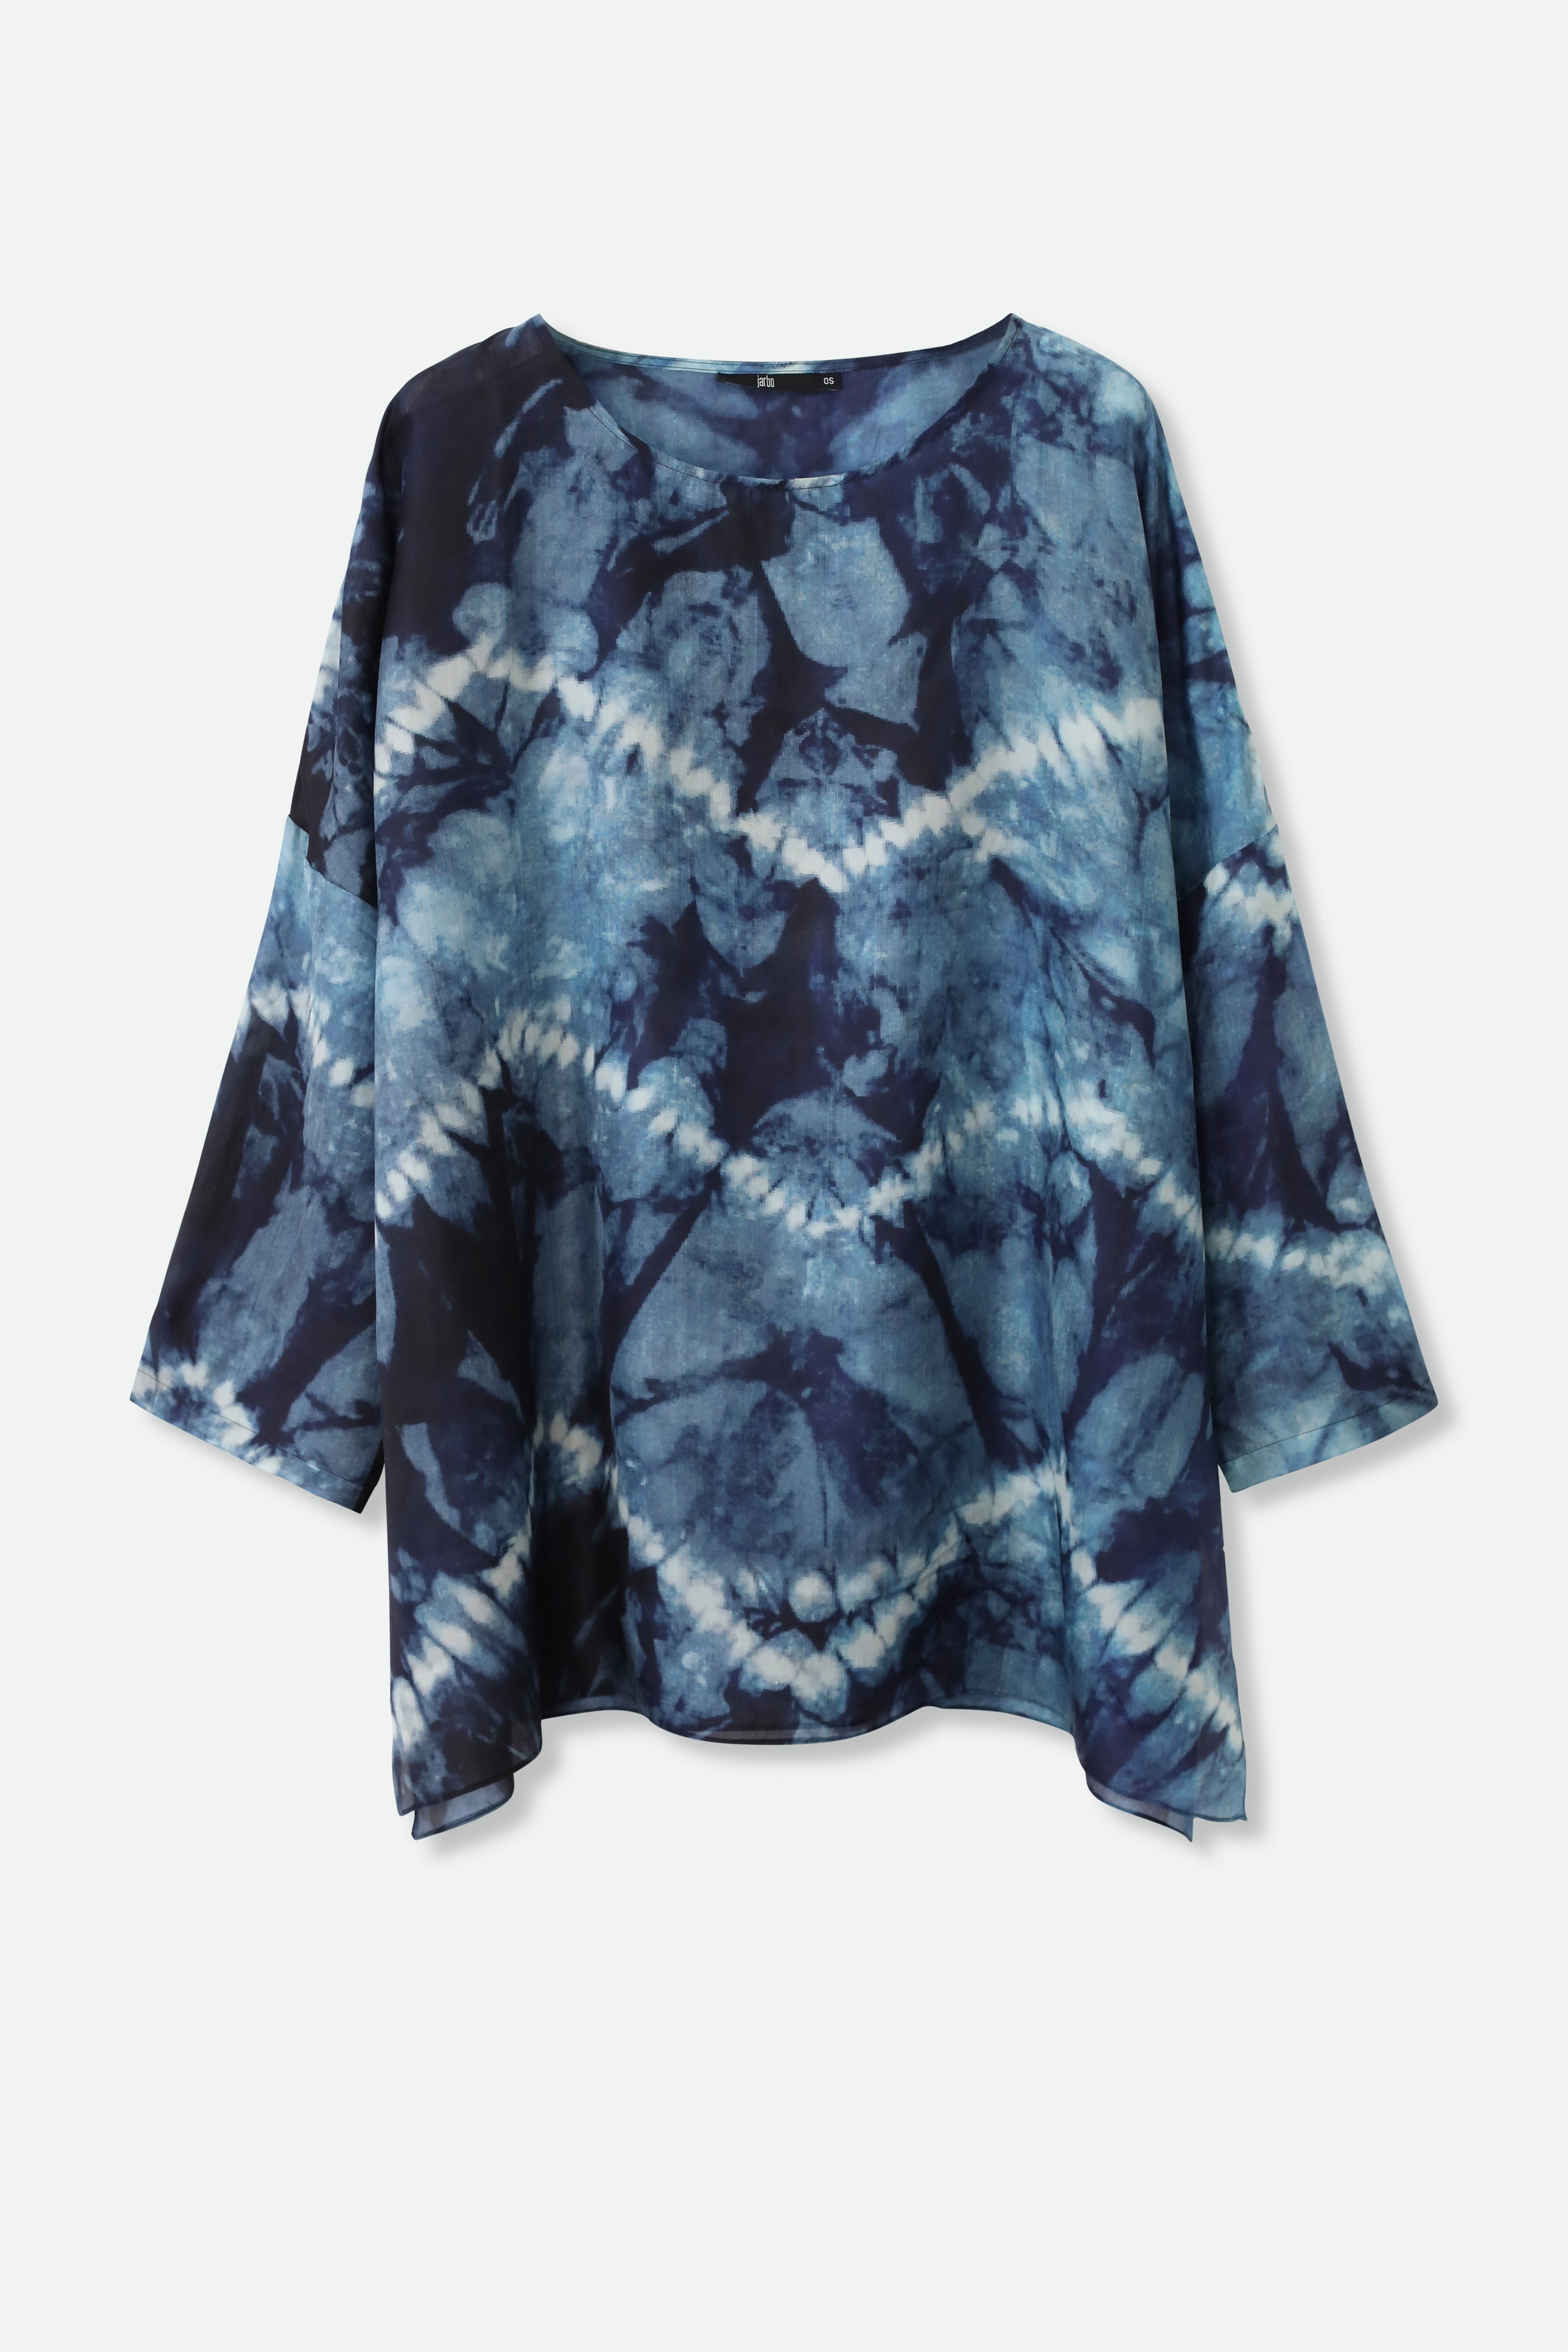 SAMIRA ONE-SIZE TUNIC IN  LIGHTWEIGHT PRINTED SILK VOILE FLORENCE